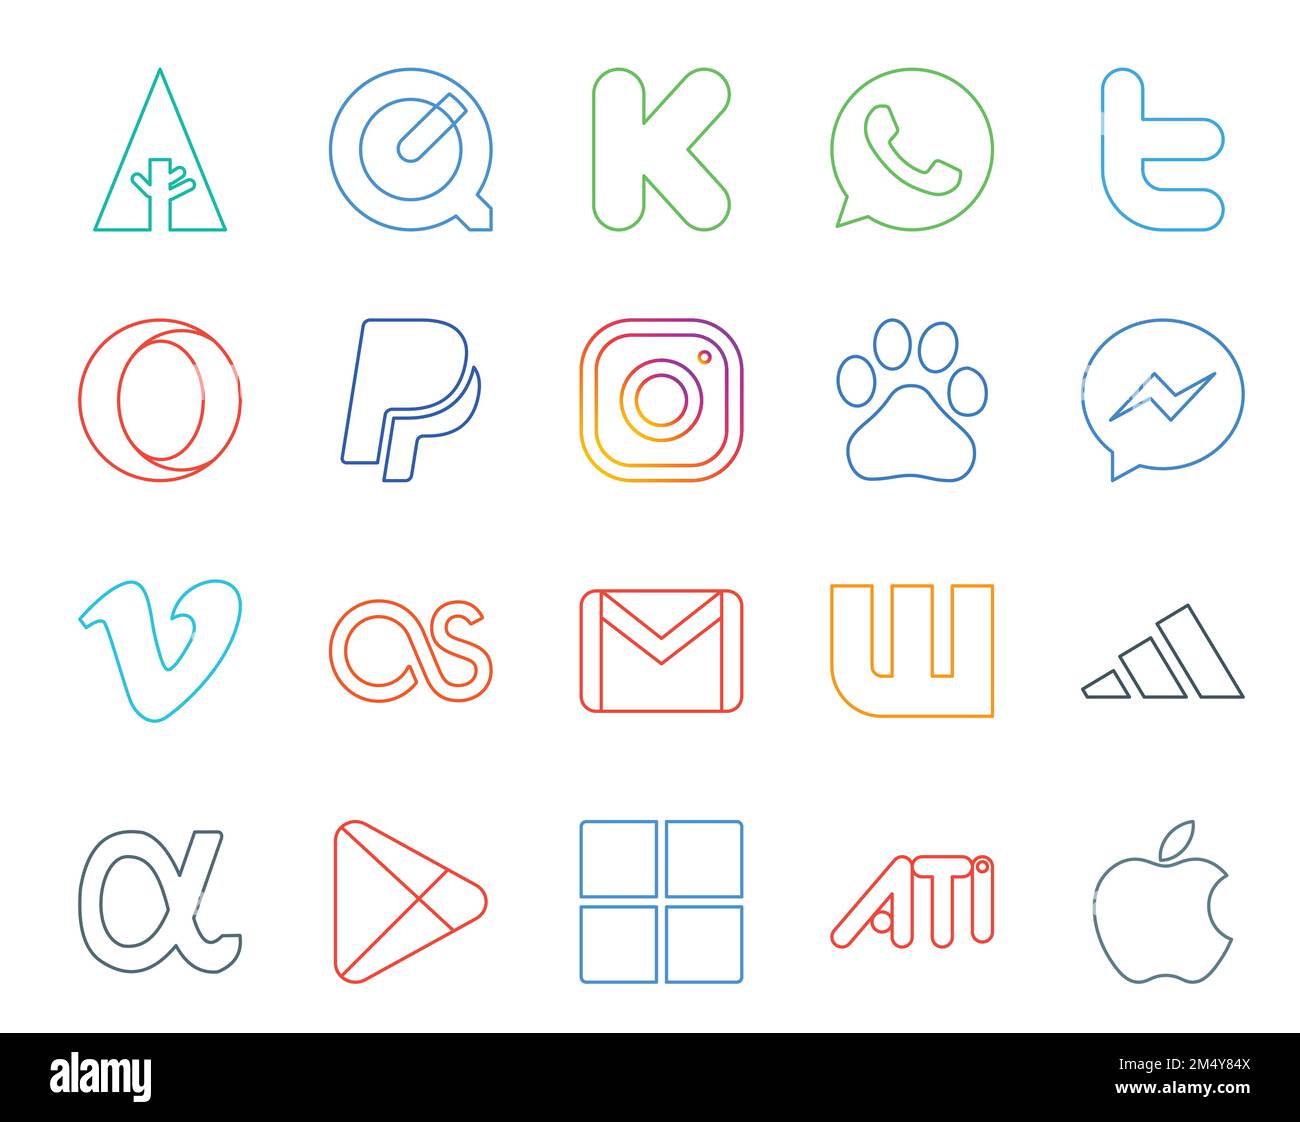 20 Social Media Icon Pack Including wattpad. email. instagram. gmail. video Stock Vector